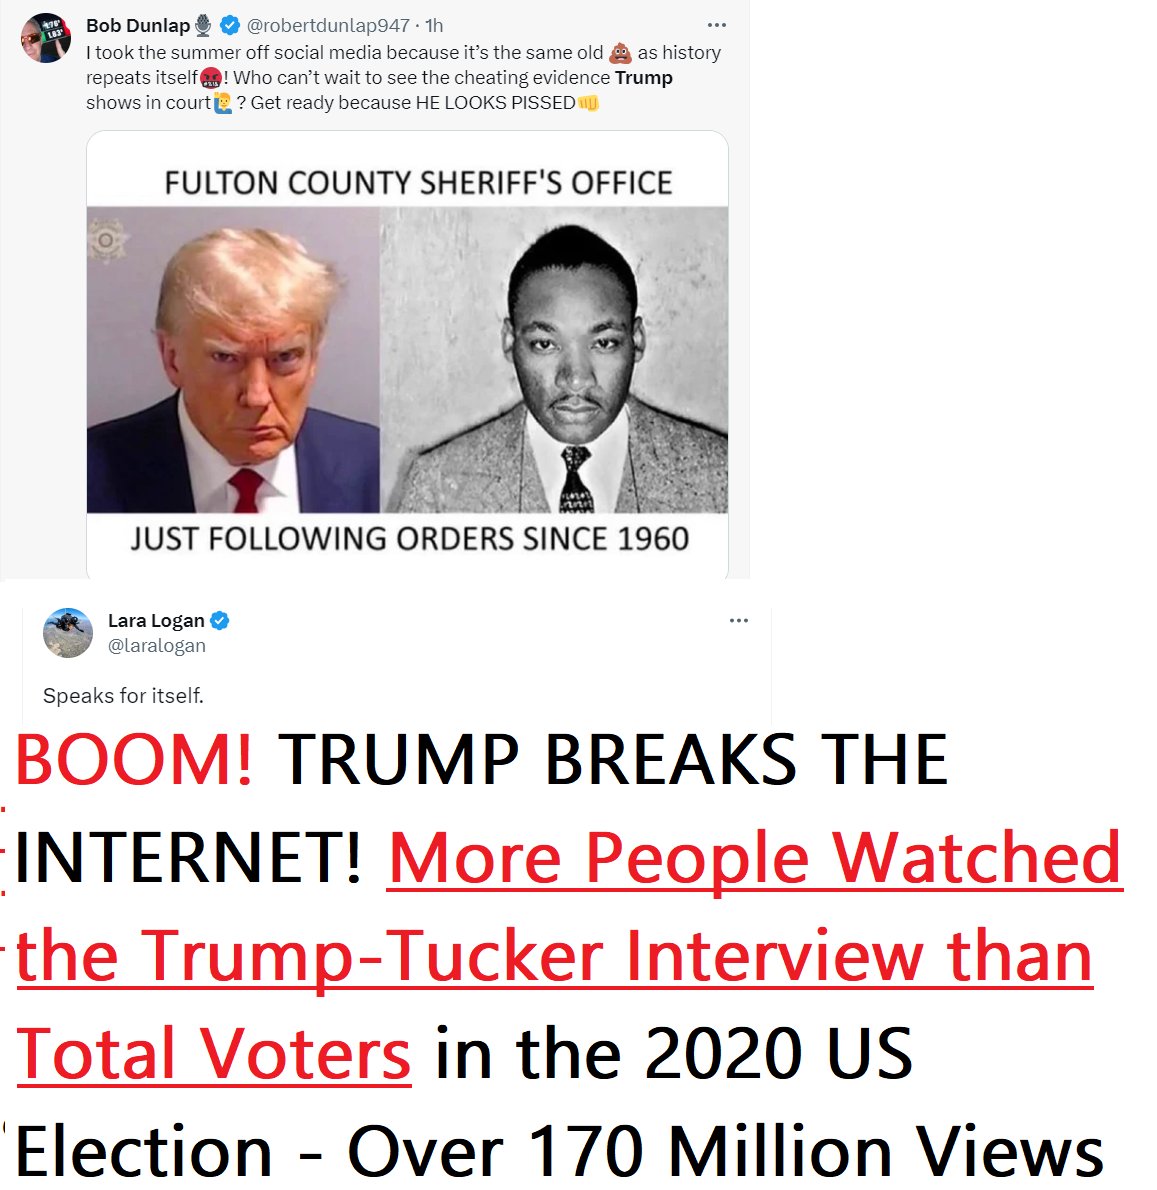 🇺🇸❤️PATRIOT FOLLOW TRAIN❤️🇺🇸

🇺🇸❤️HAPPY SATURDAY !❤️🇺🇸

🇺🇸❤️DROP YOUR HANDLES ❤️🇺🇸 

🇺🇸❤️FOLLOW OTHER PATRIOTS❤️🇺🇸

🔥❤️LIKE & RETWEET IFBAP❤️🔥

🇺🇸❤️PRAY FOR TRUMP❤️🇺🇸

BOOM! TRUMP BREAKS THE INTERNET! More People Watched the Trump-Tucker Interview than Total Voters in the 2020…